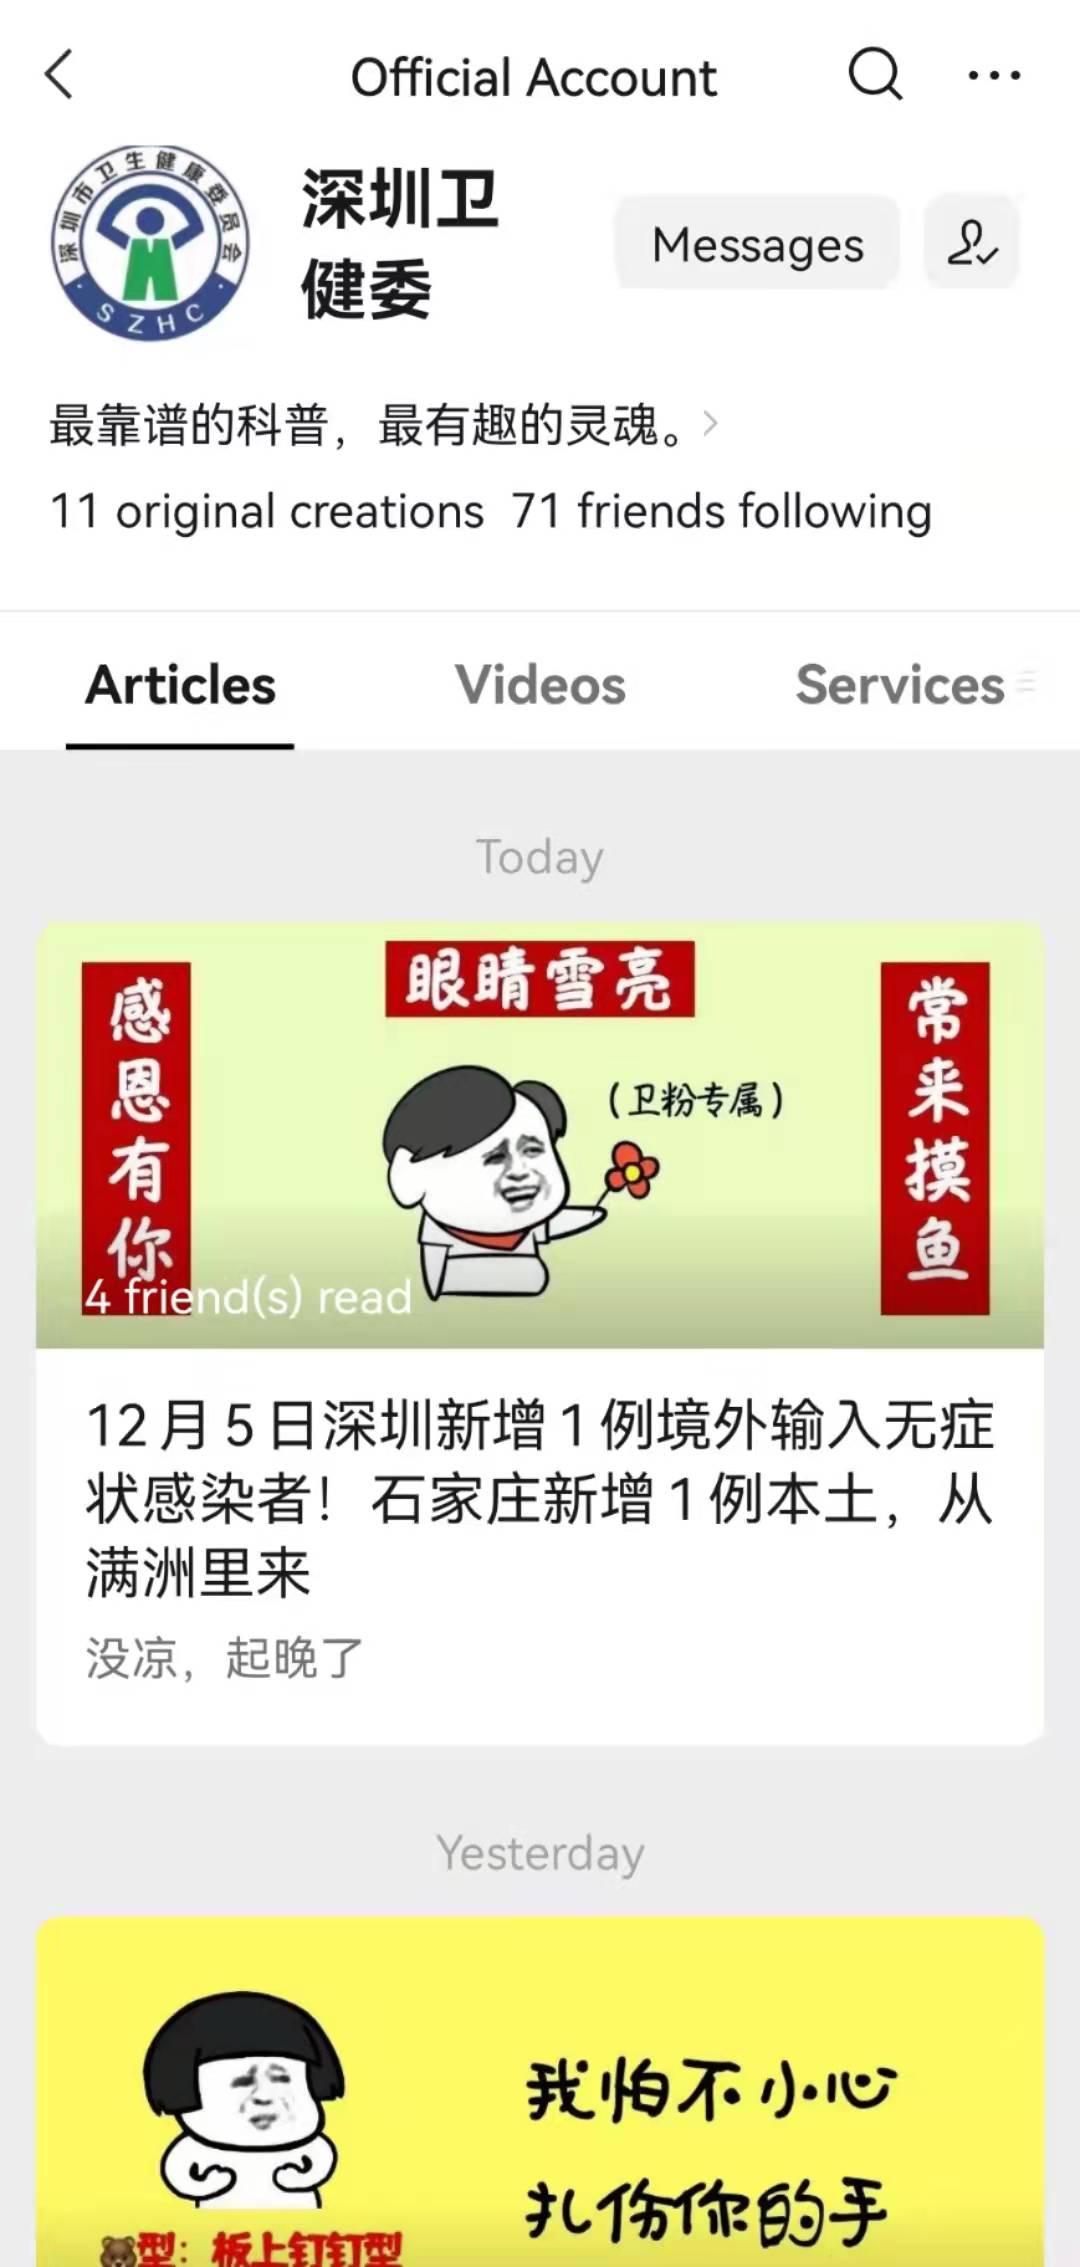 Photo: screenshot from the official account of Shenzhen Health Commission on WeChat